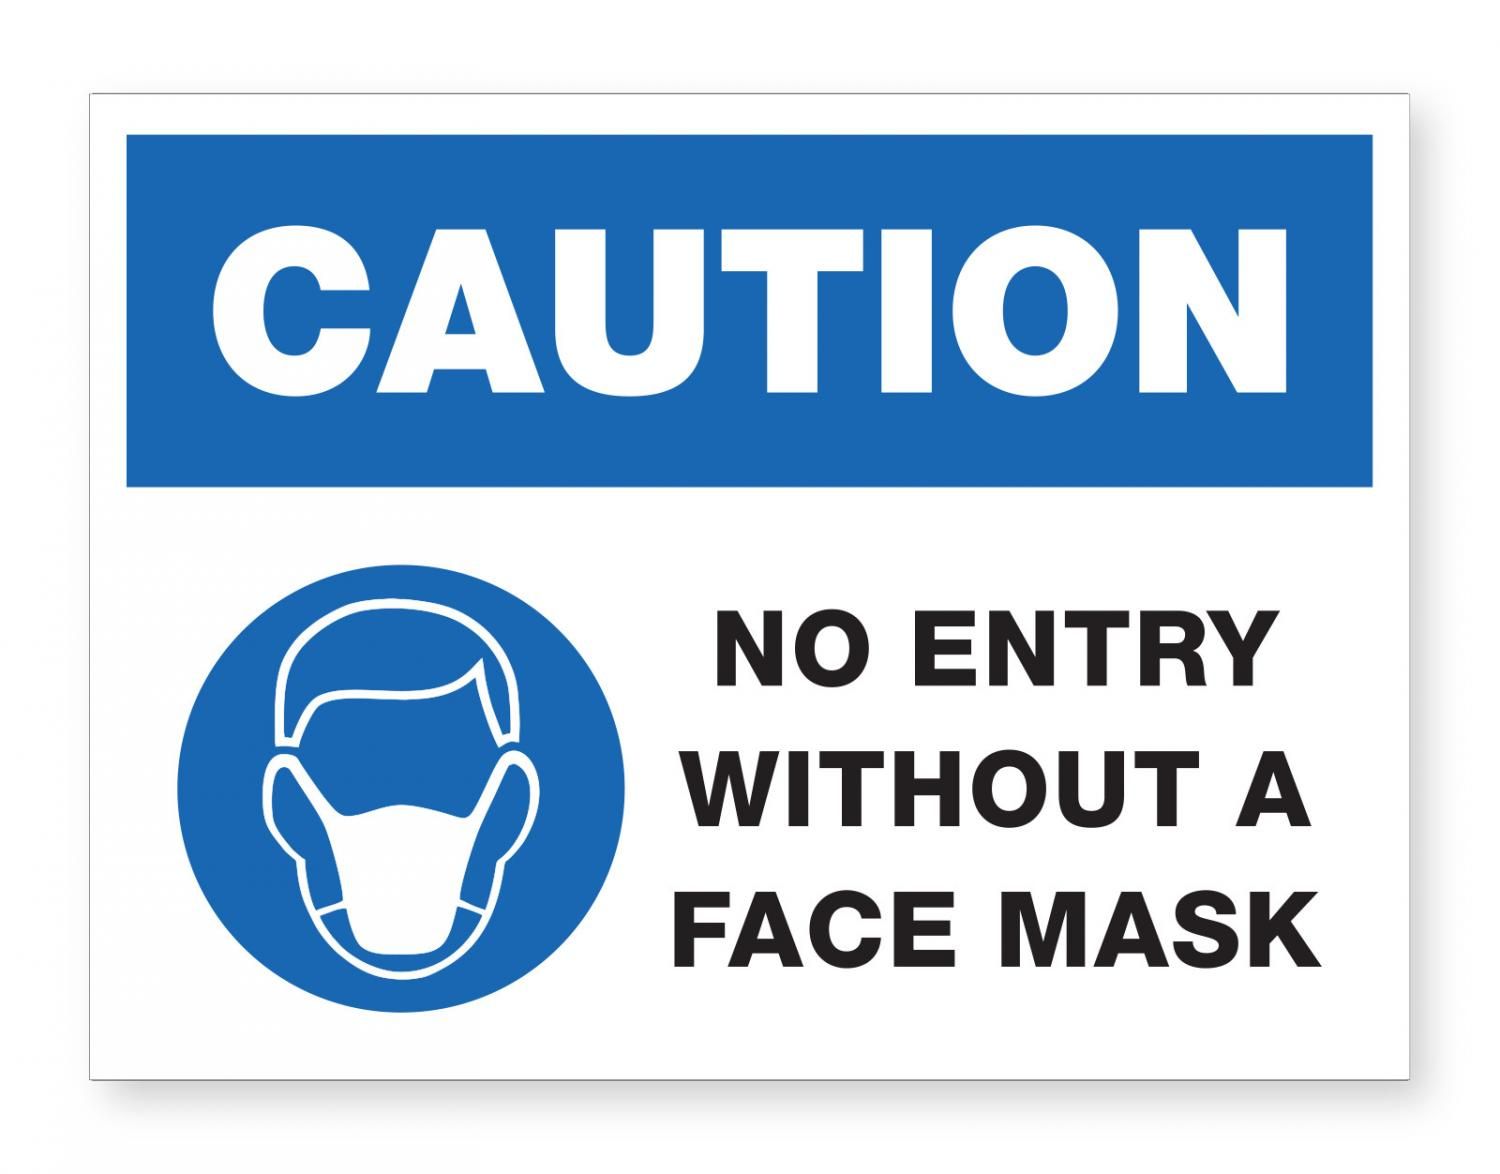 No Entry without Mask.